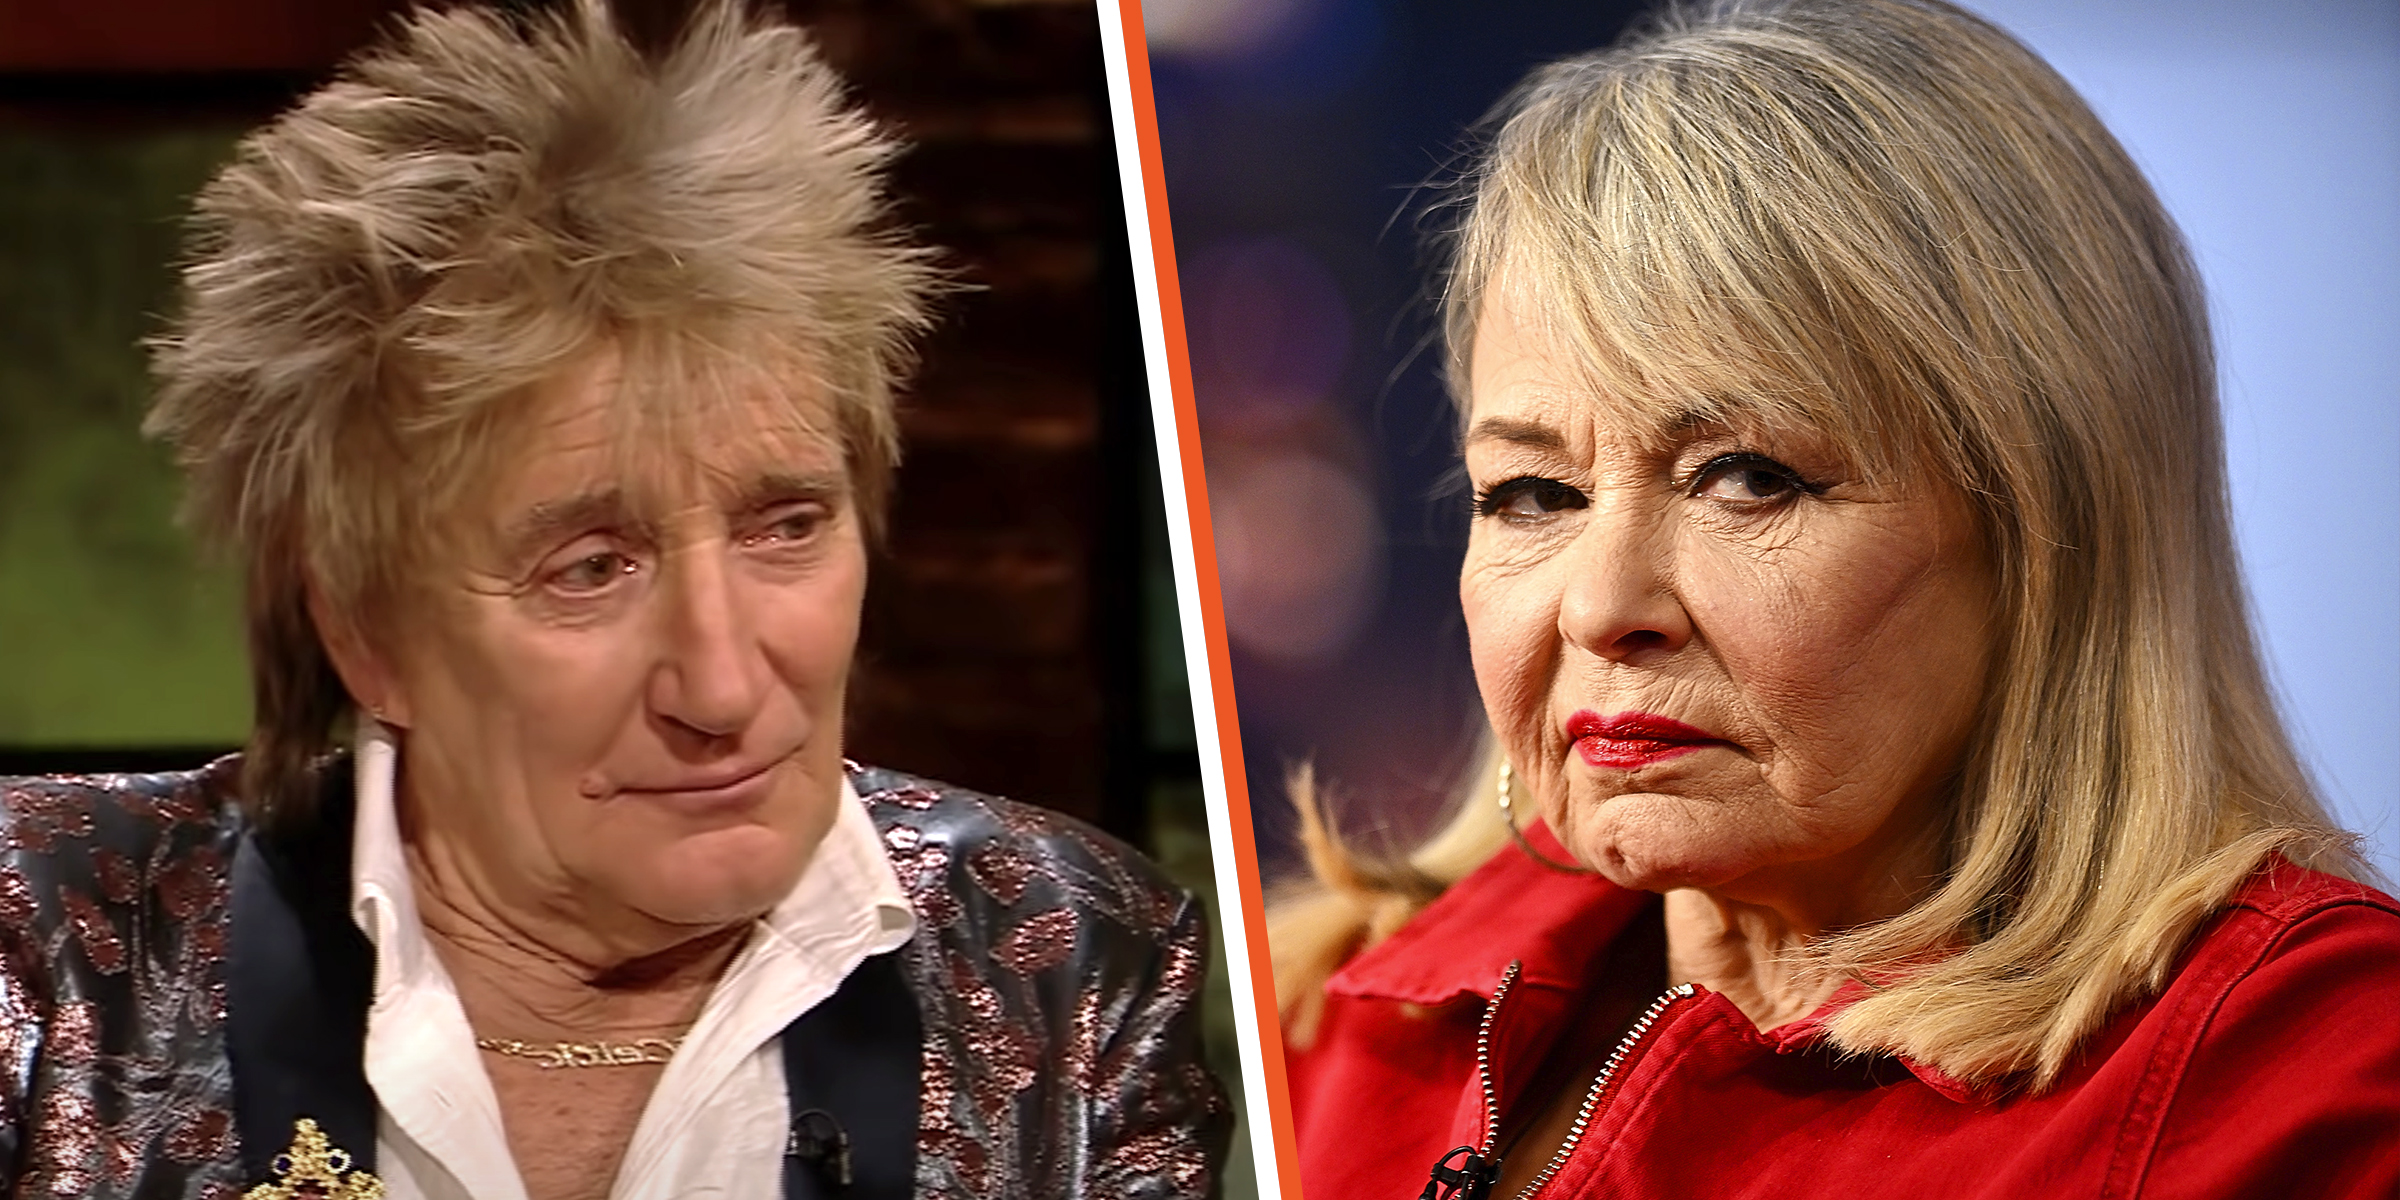 Rod Stewart and Roseanne Barr | Source: youtube.com/RTÉ - IRELAND’S NATIONAL PUBLIC SERVICE MEDIA | Getty Images